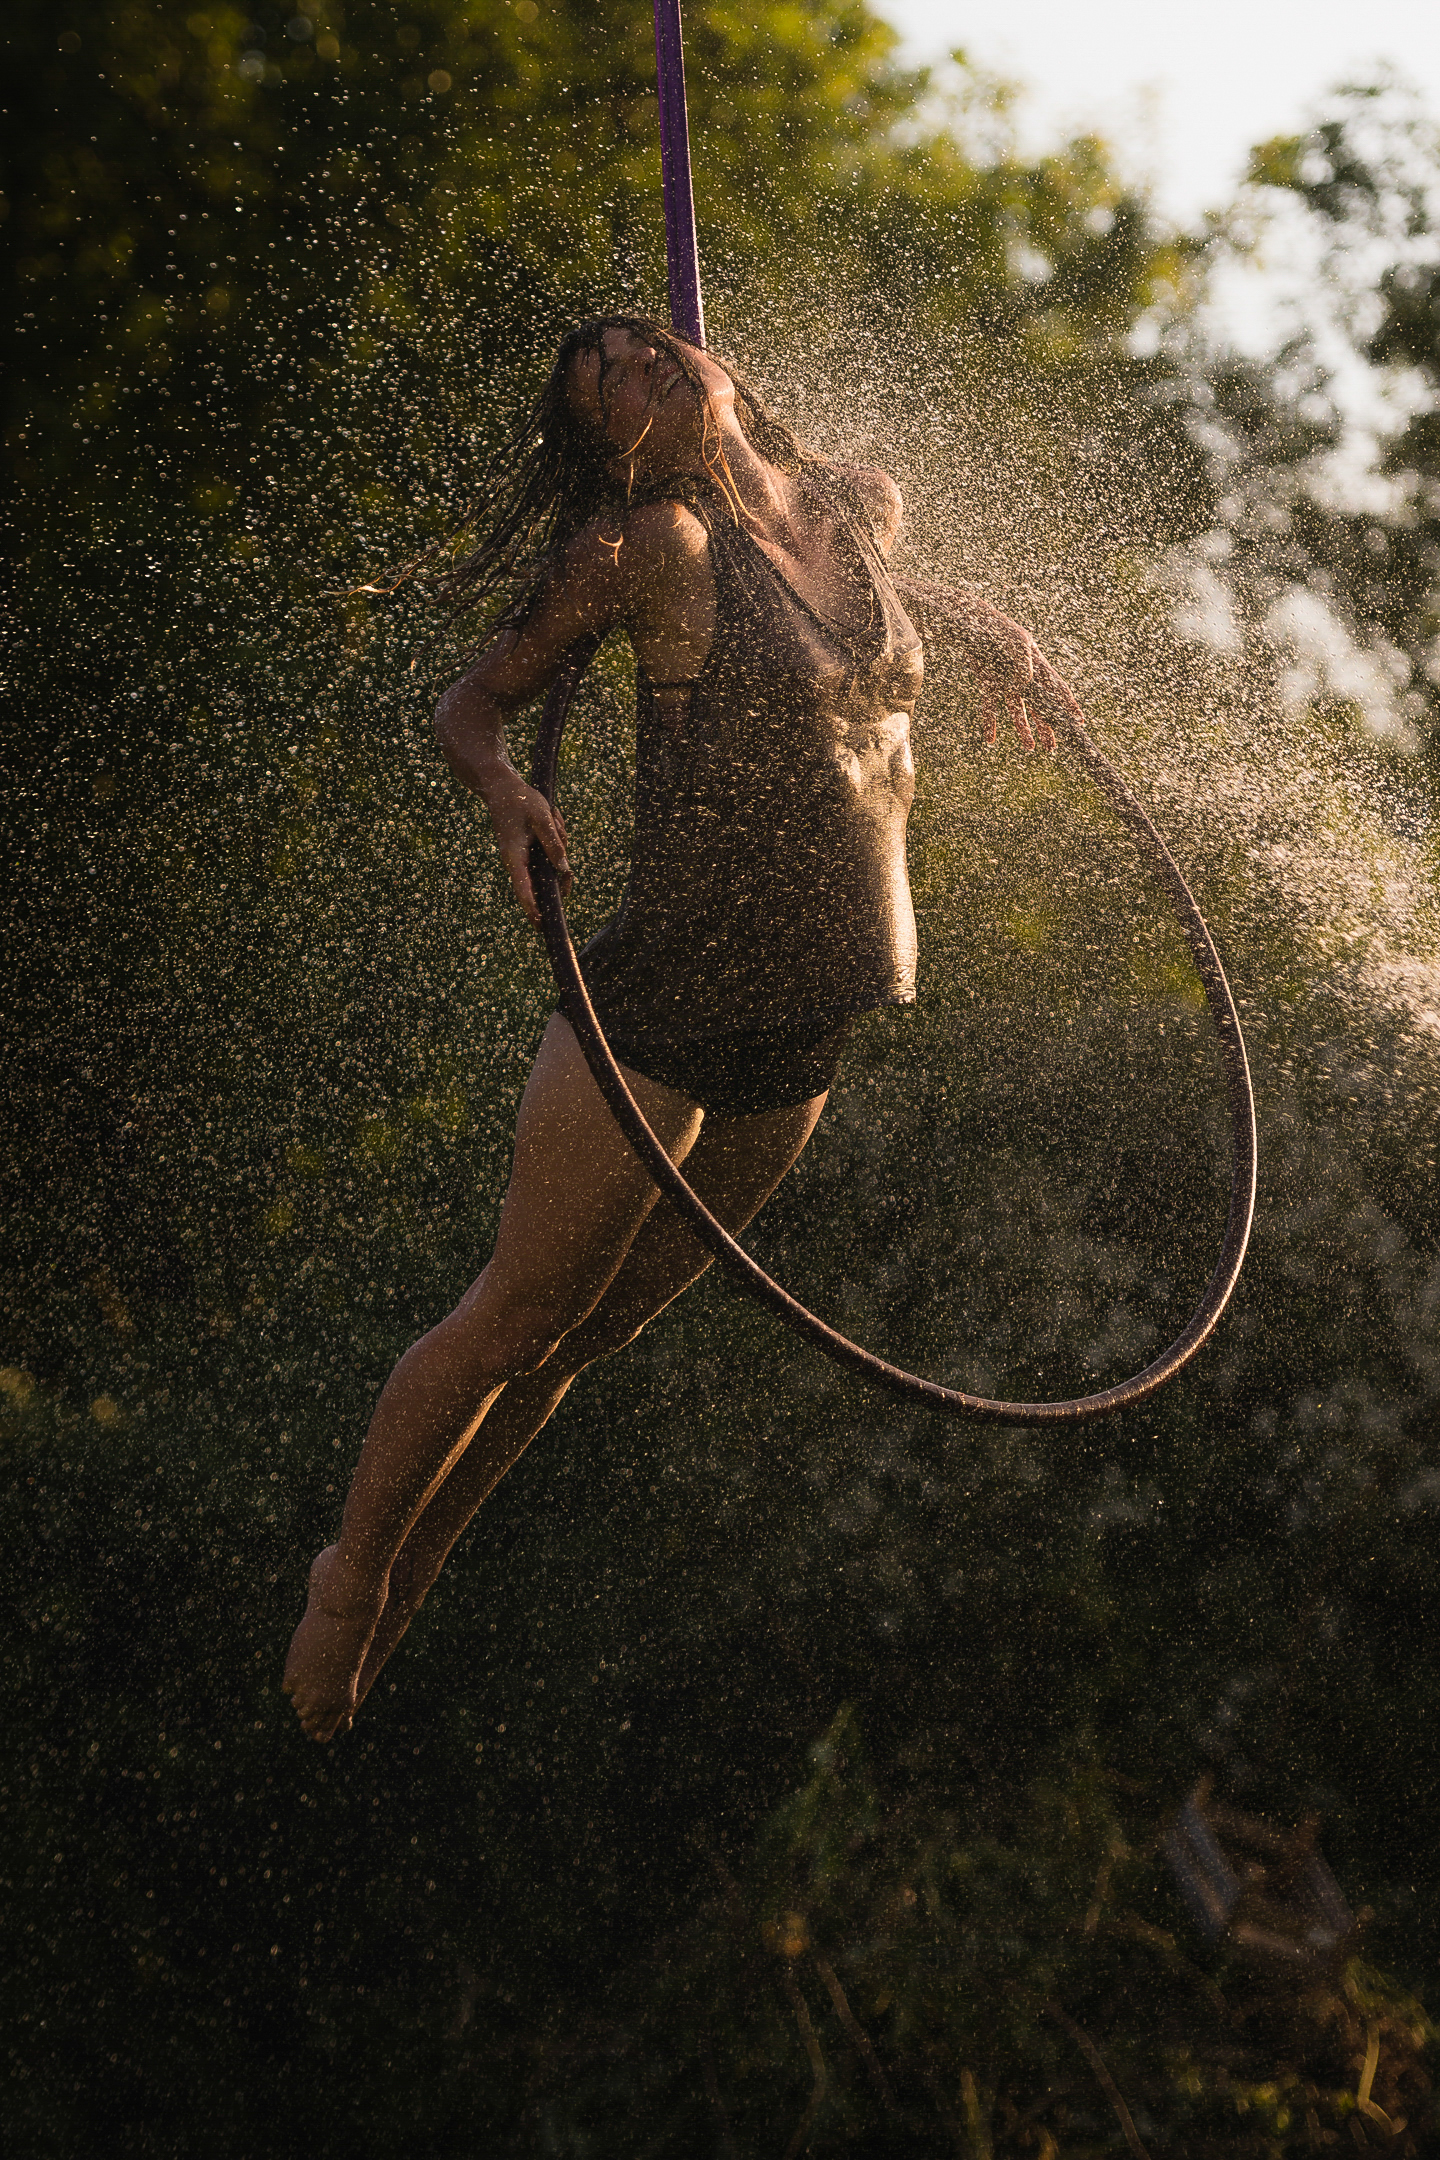 A woman hangs from a hoop surrounded by trees in the rain